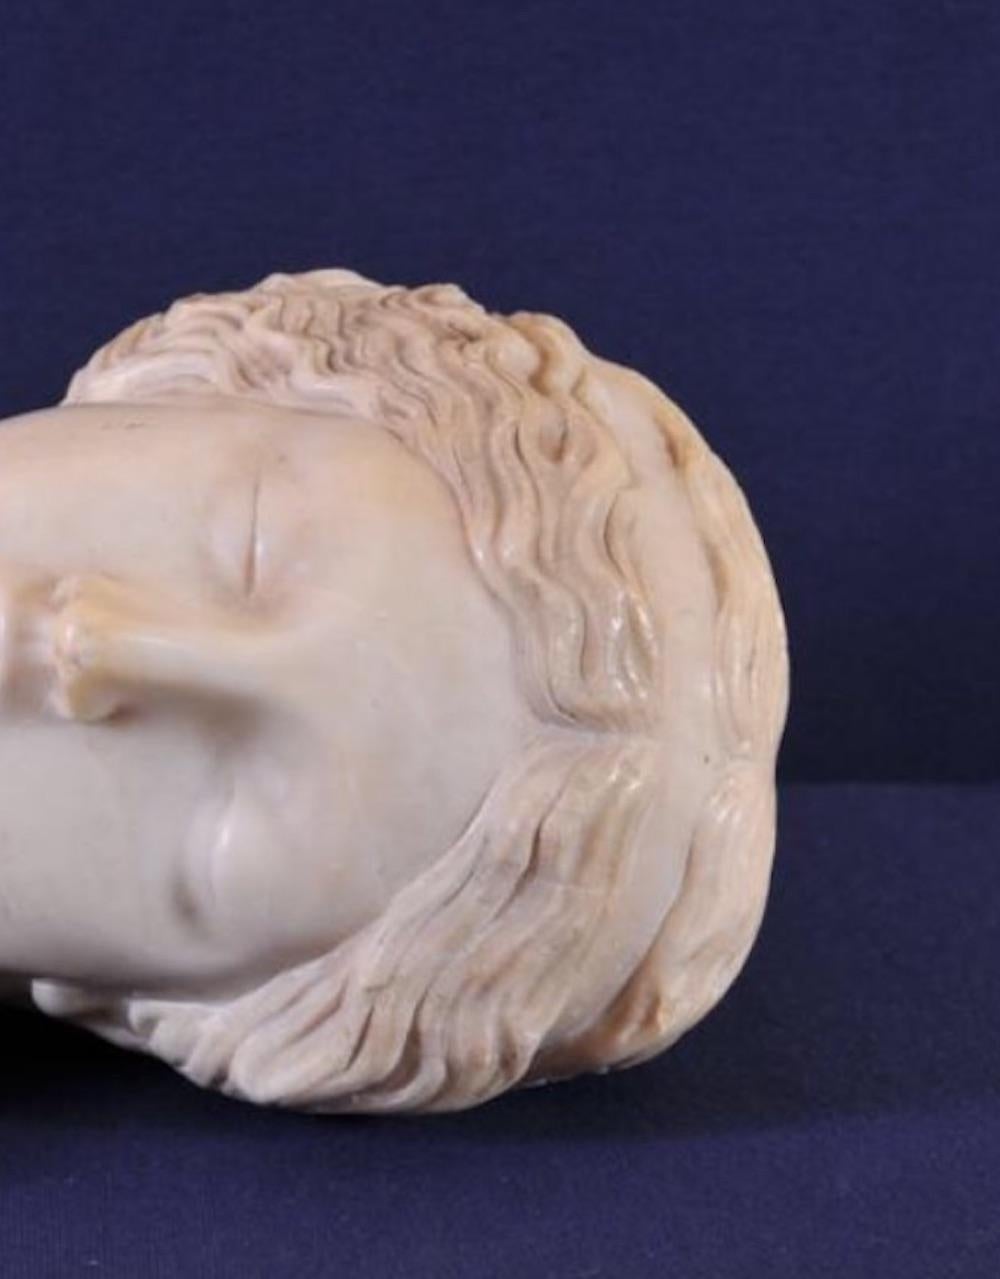 Italian Marble Sculpture The Sleeping Ariadne 19th century Grand Tour - Black Figurative Sculpture by Unknown